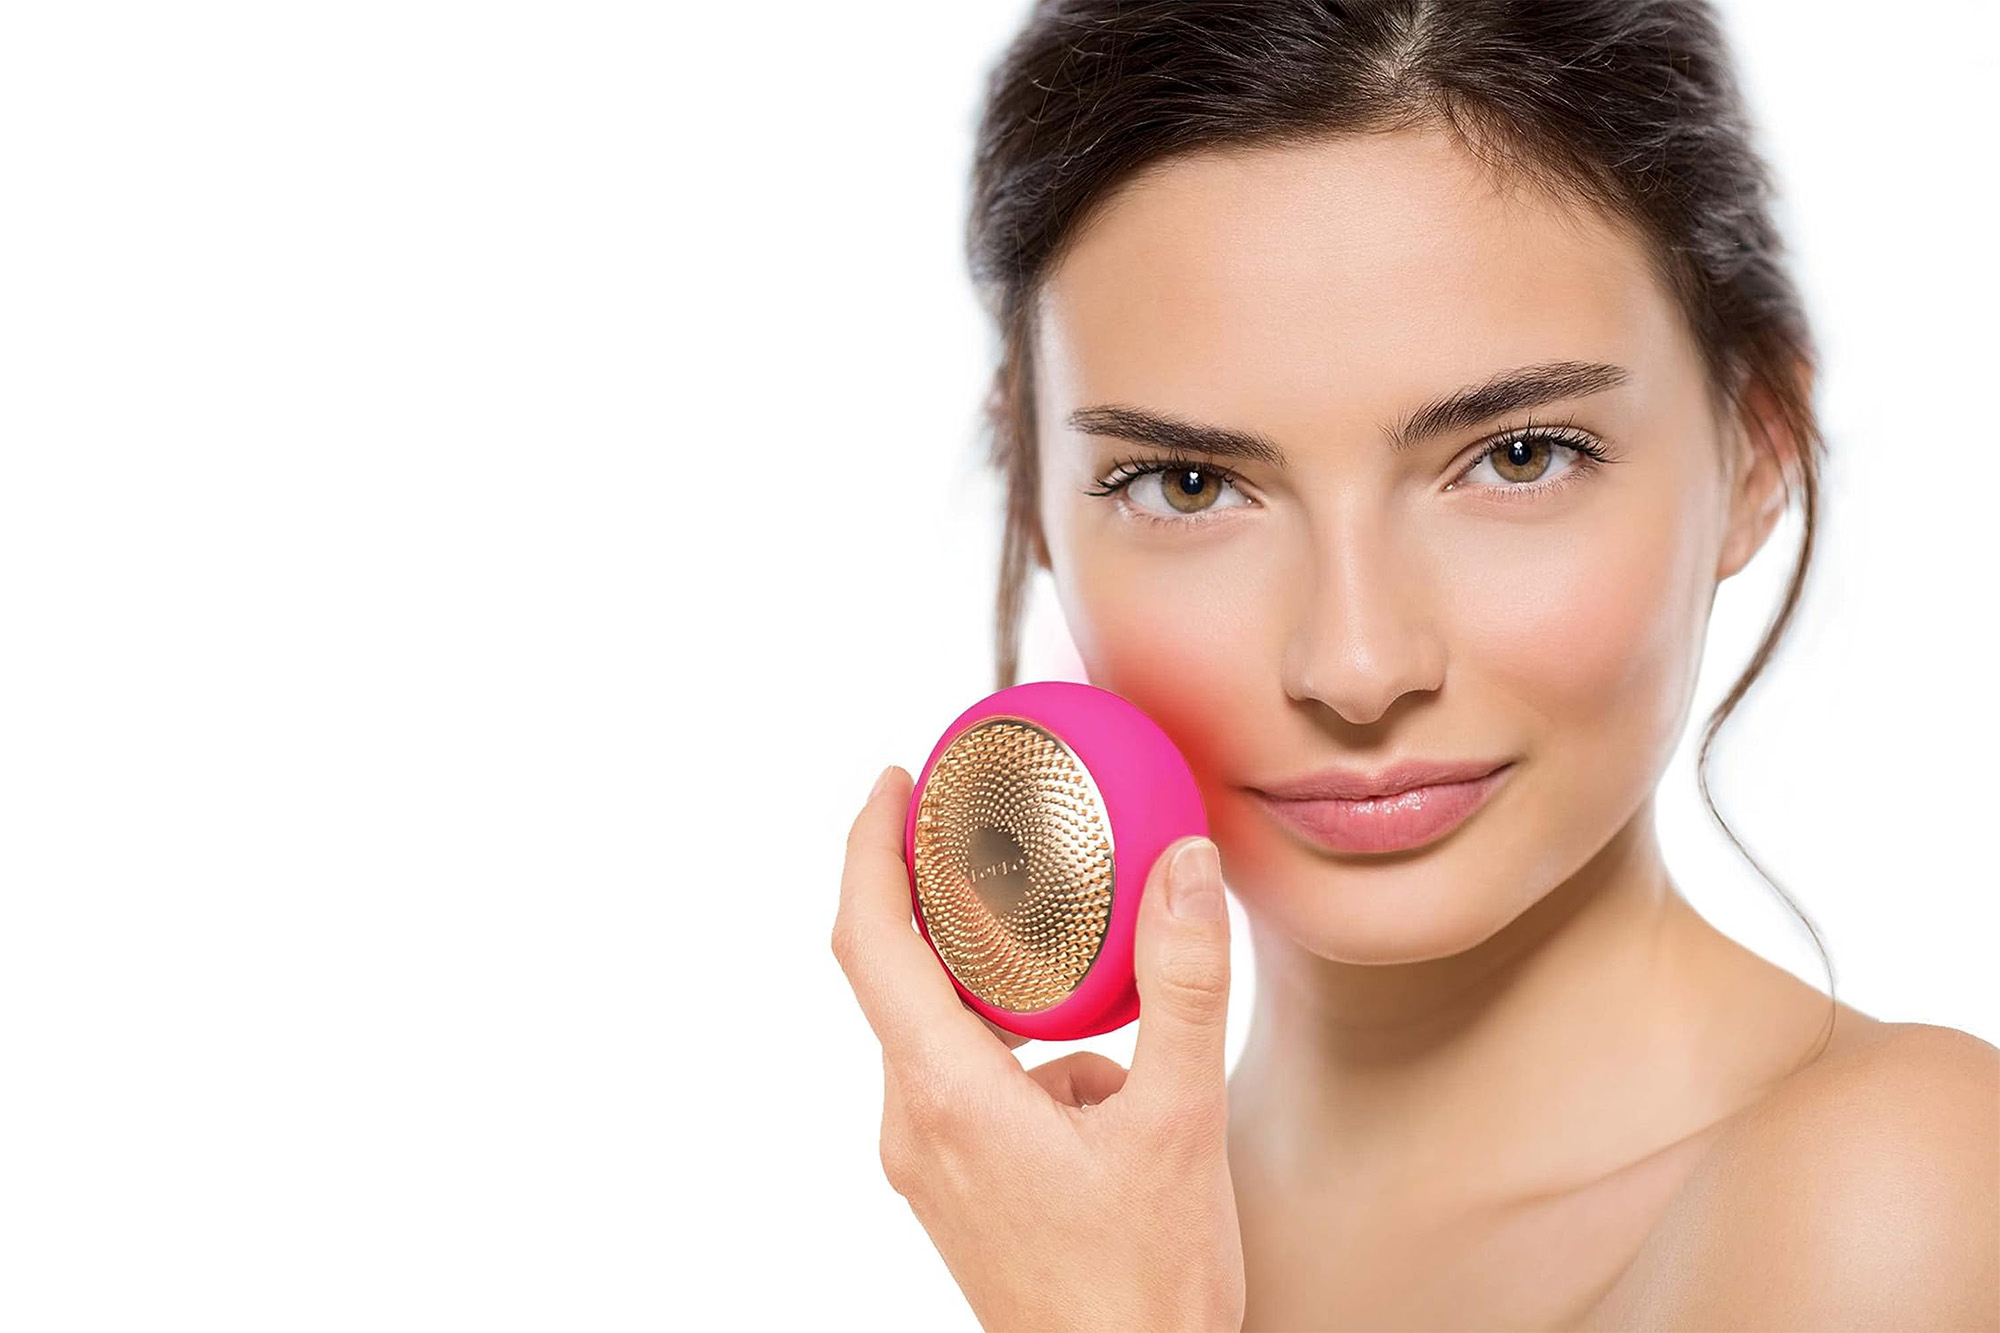 A model using a pink Foreo LED tool